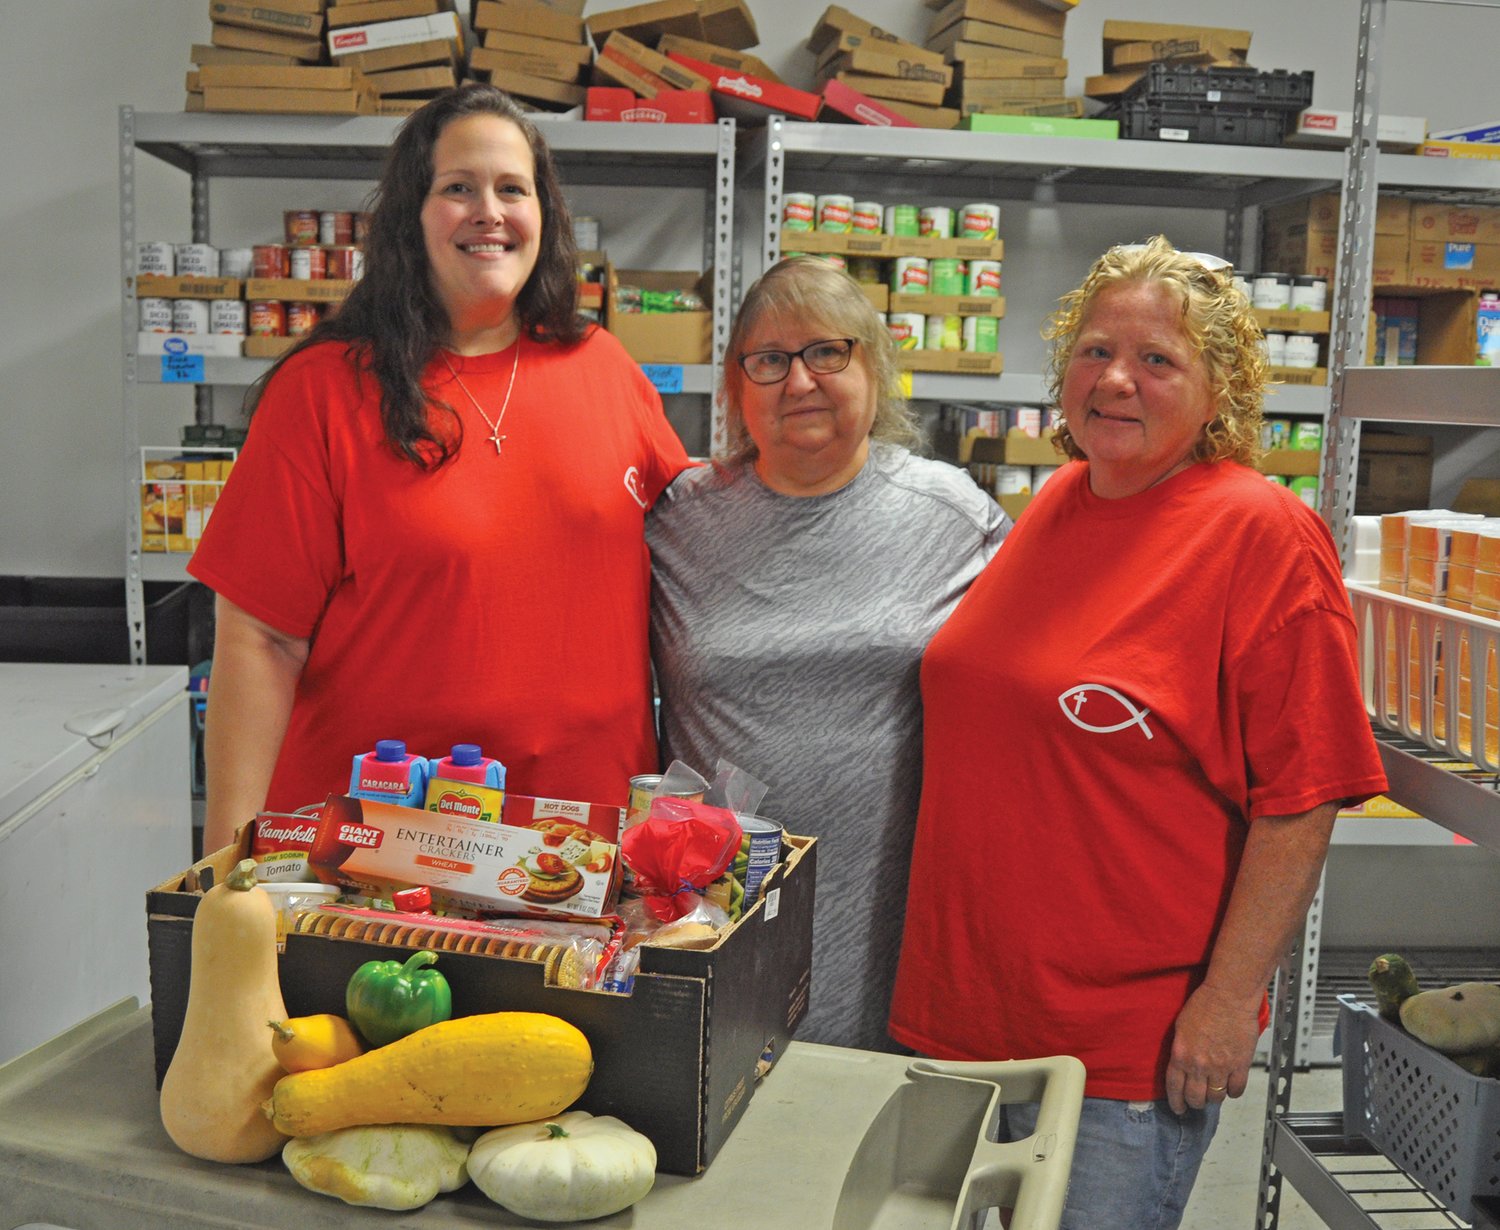 FISH volunteers Kara Kochell, from left, Martha Adair and Ellen Simpson in the food pantry on Thursday. The ministry is in need of more volunteers.